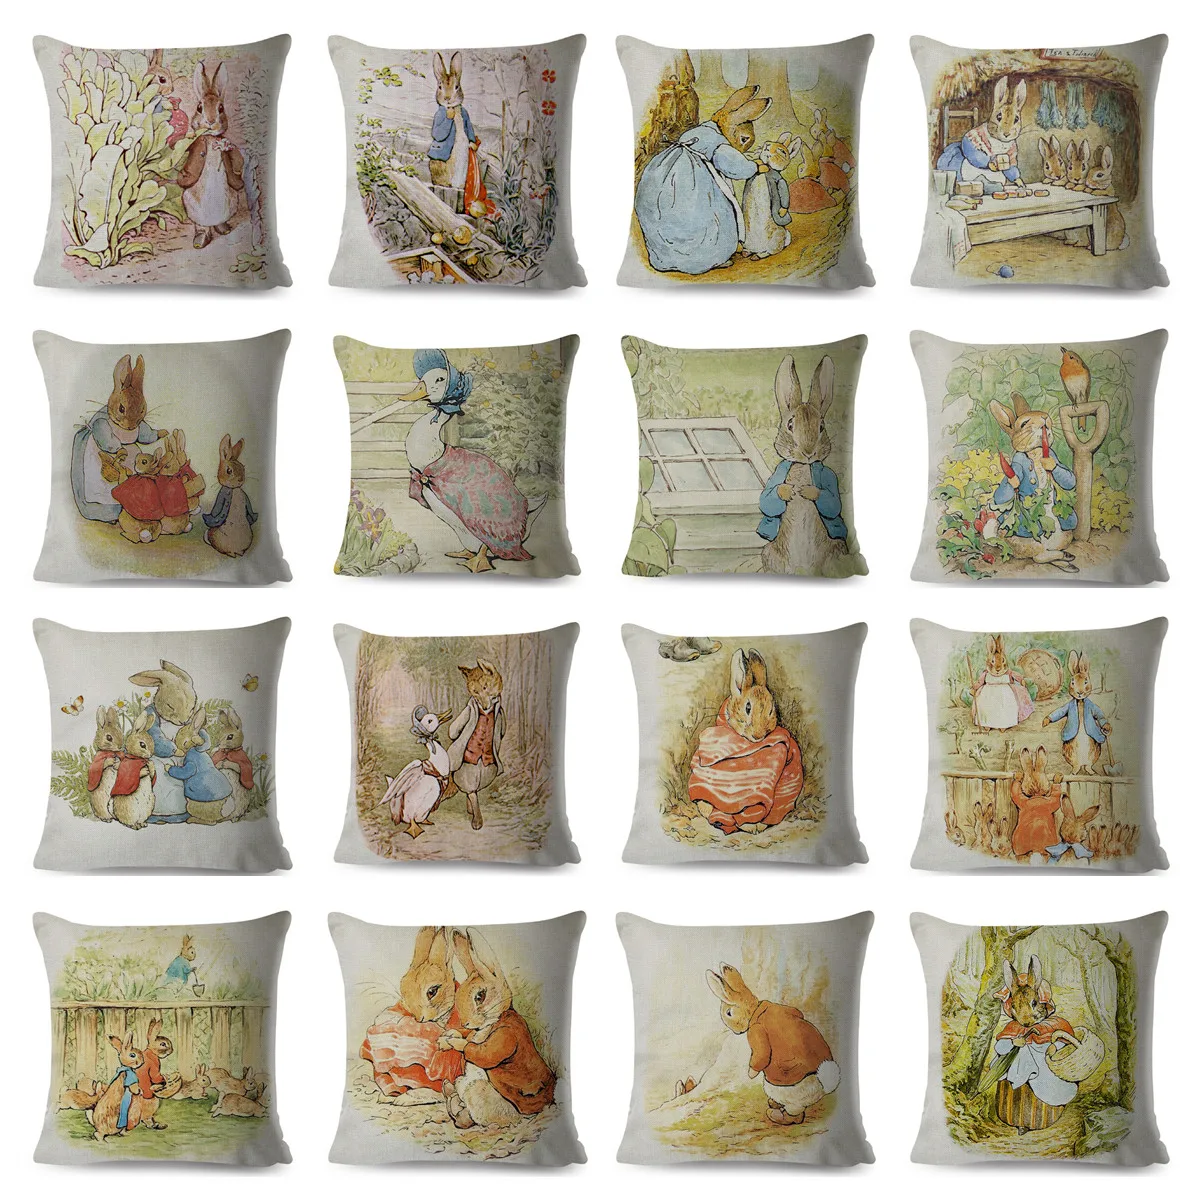 

Easter Decoration Pillowcases 45x45cm Linen Pillow Cover Easter Decorations Favors Pillows Cushion Cover Easter Bunny Pillowcase